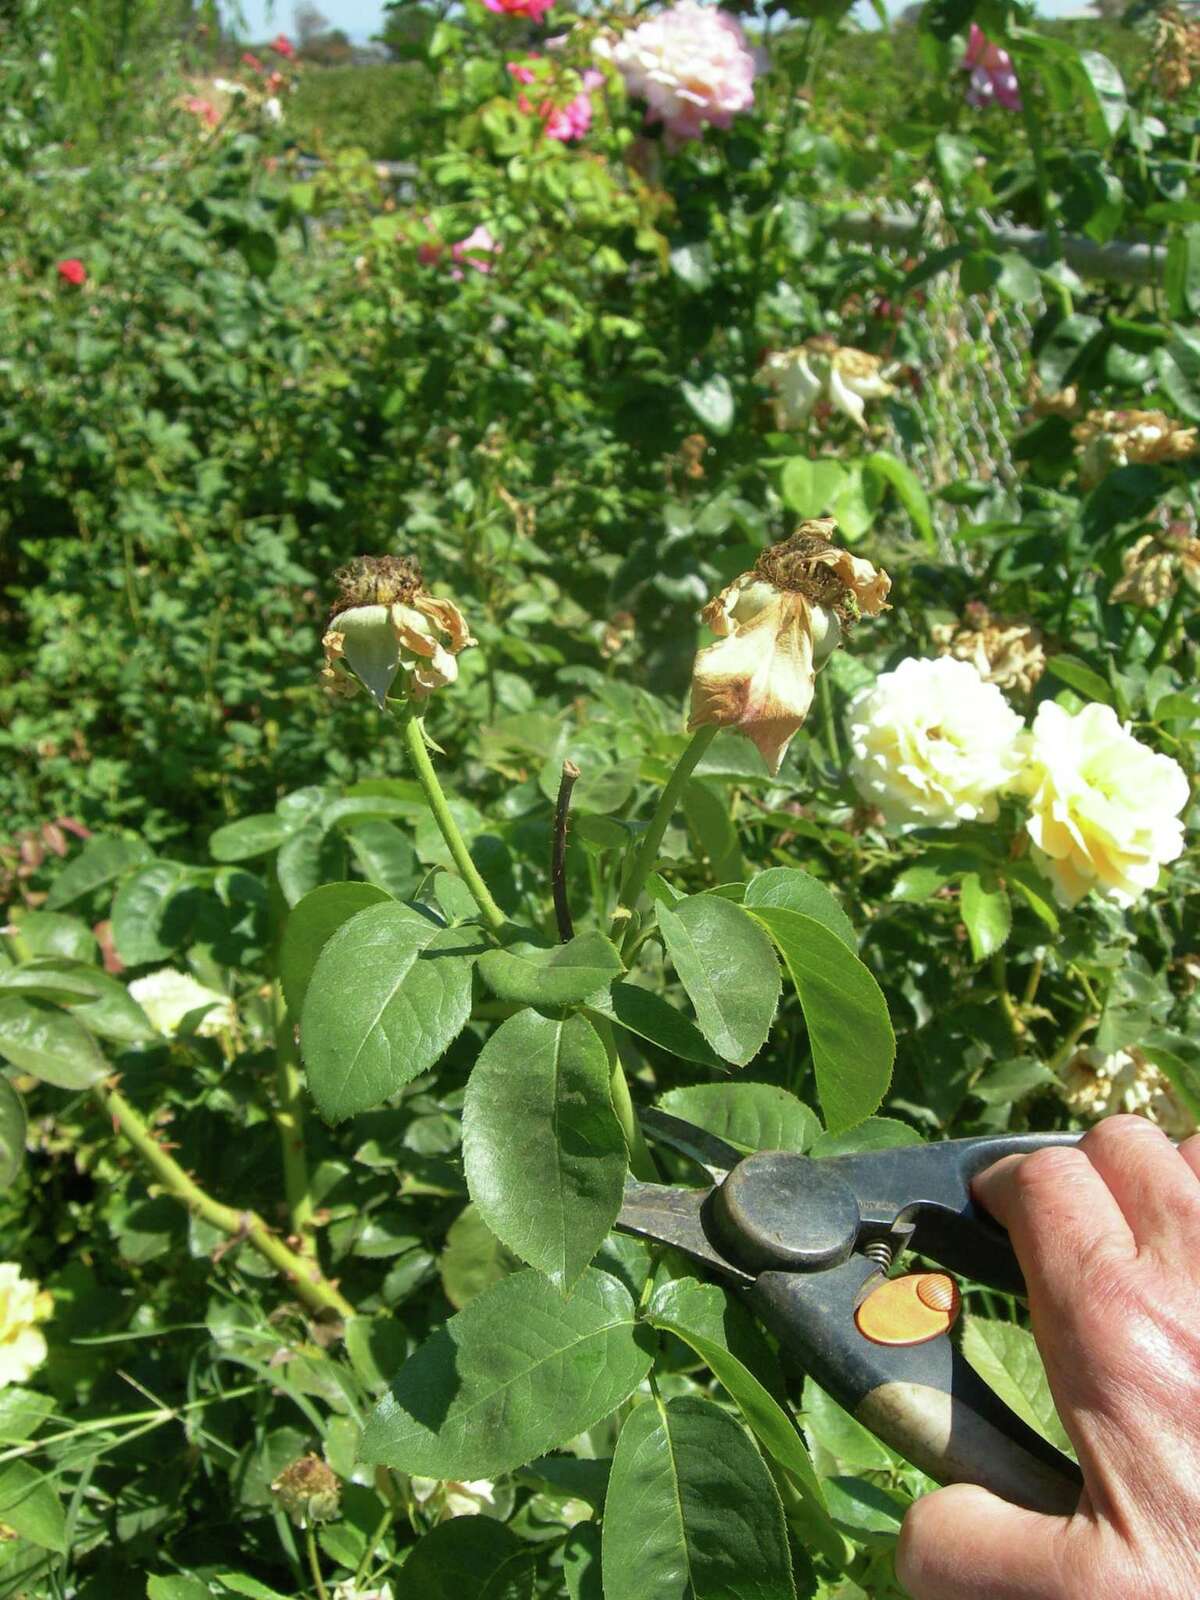 Deadhead established roses just above a leaf with five leaflets.